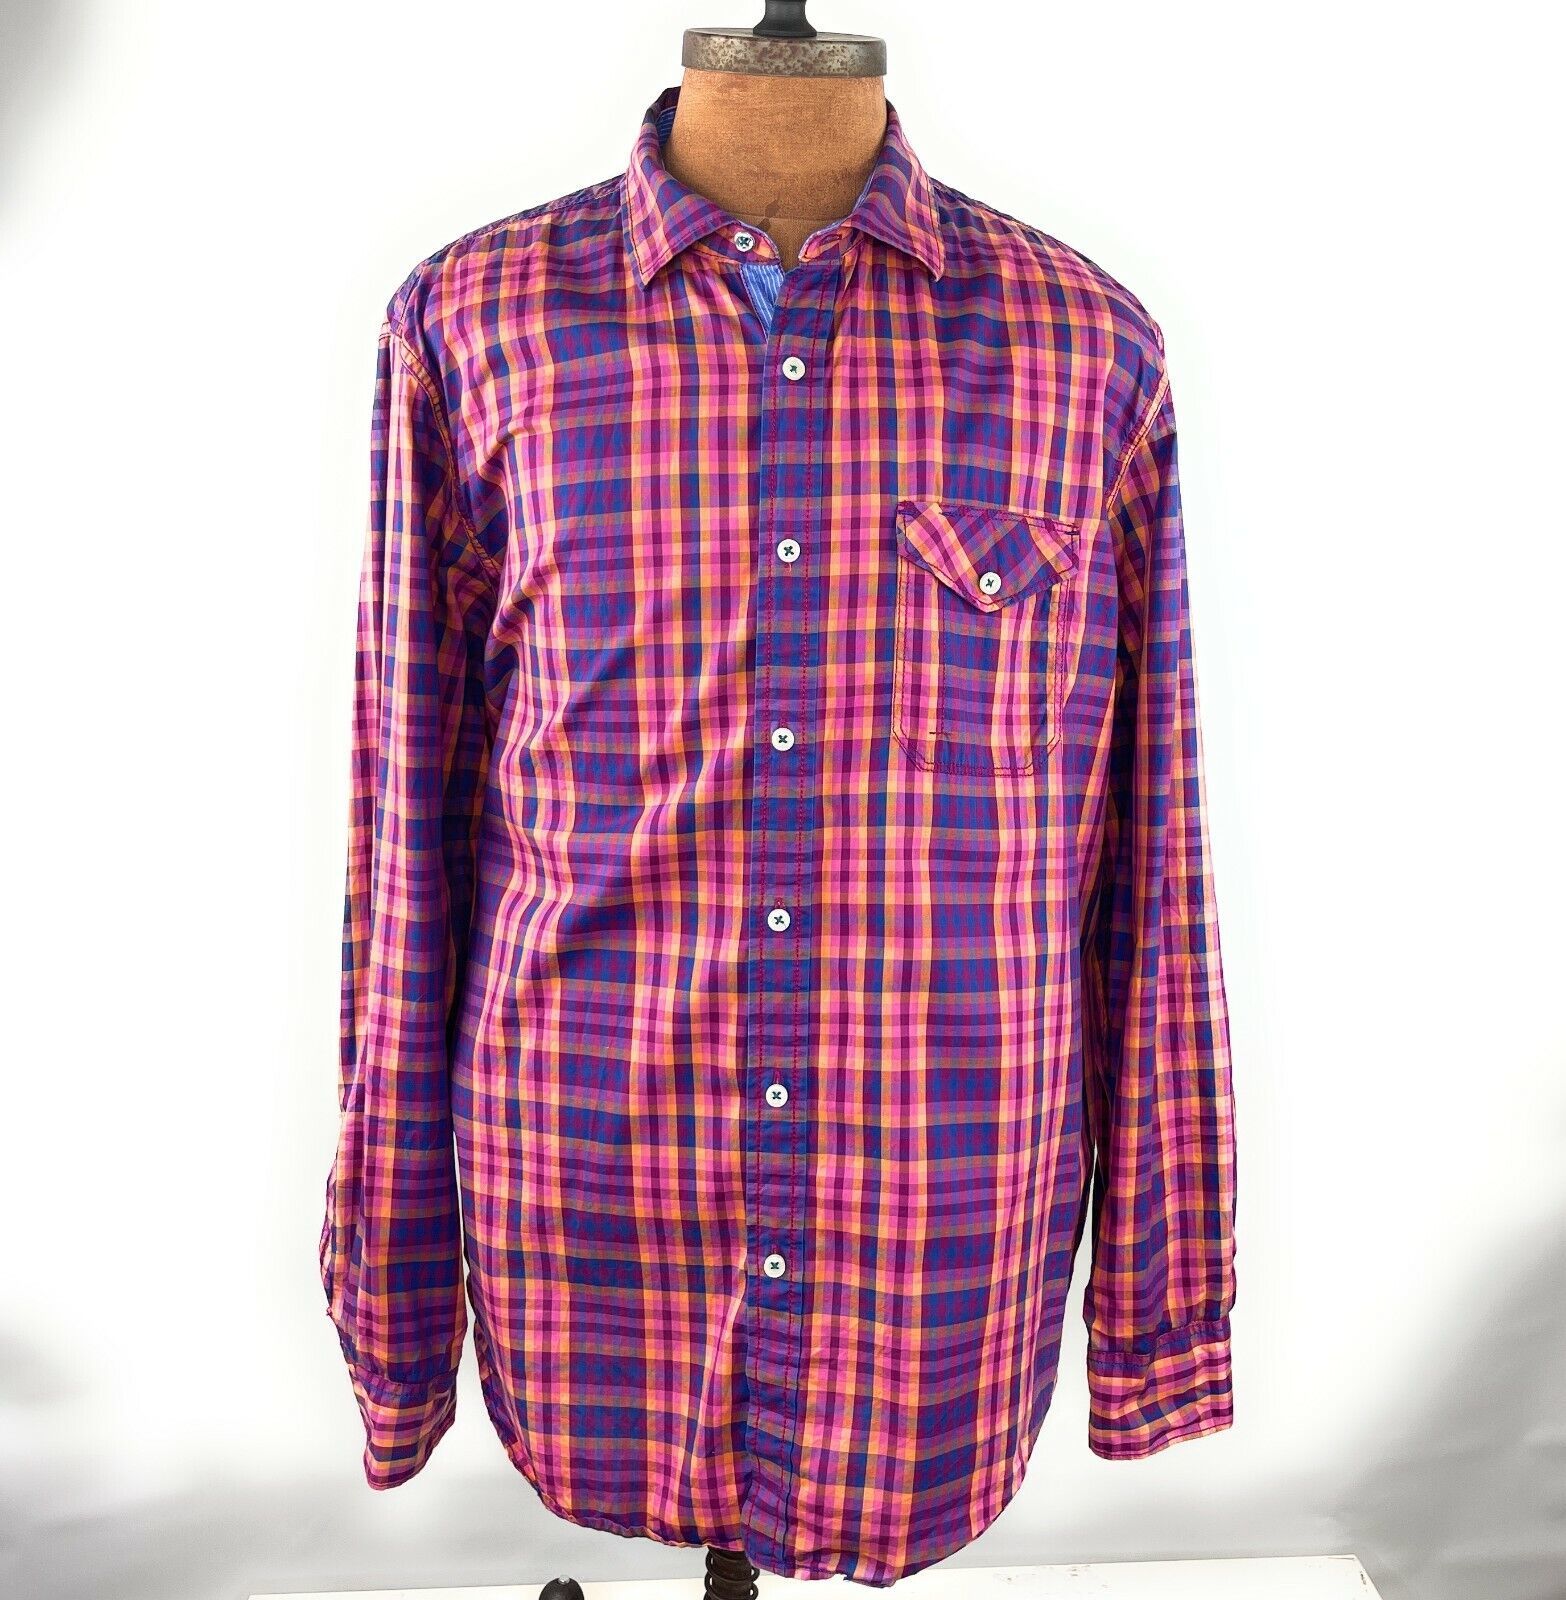 Primary image for TOMMY BAHAMA LONG SLEEVE “MAKE LIFE ONE LONG WEEKEND” CHECK BUTTON UP SHIRT XL